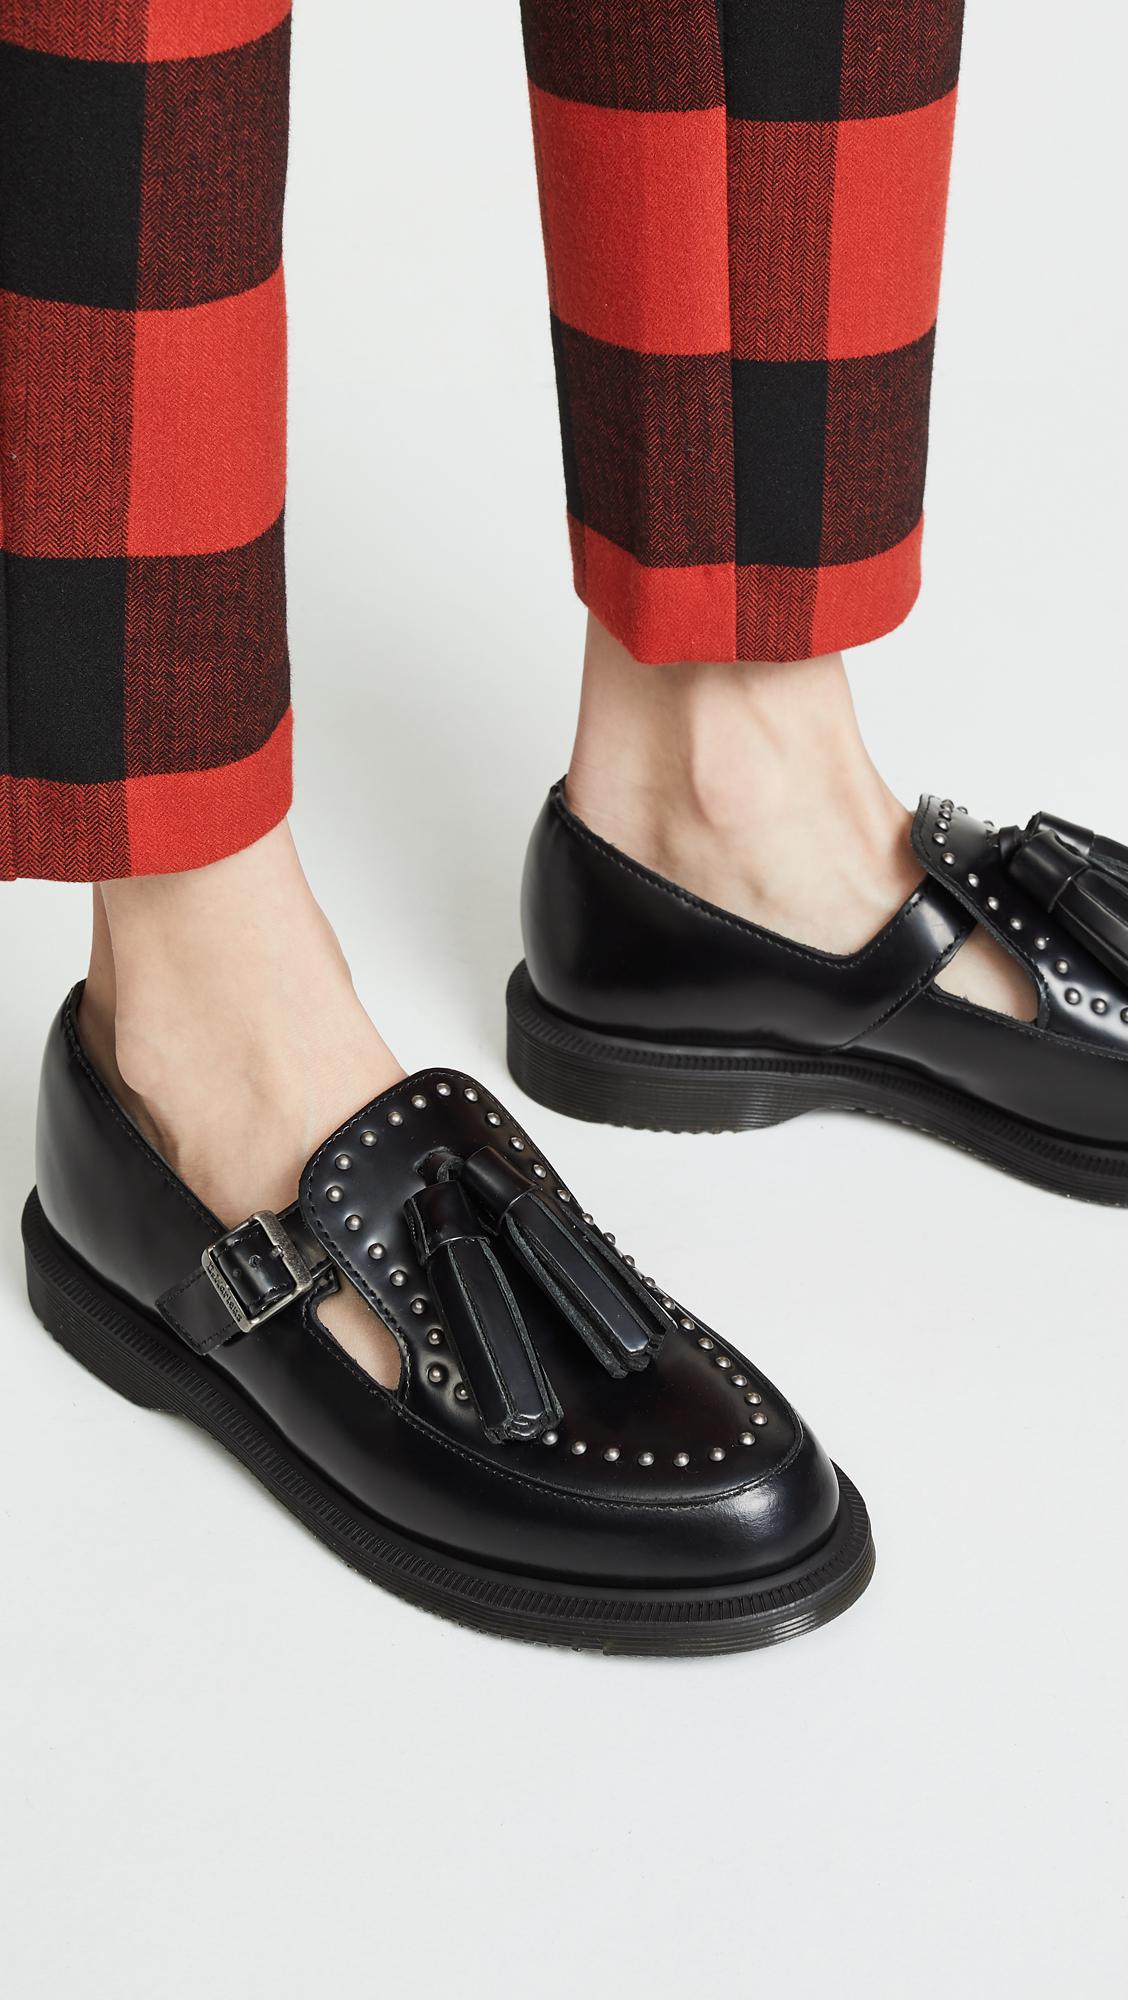 Lyst - Dr. Martens Gracia Stud Mary Jane Shoes in Black